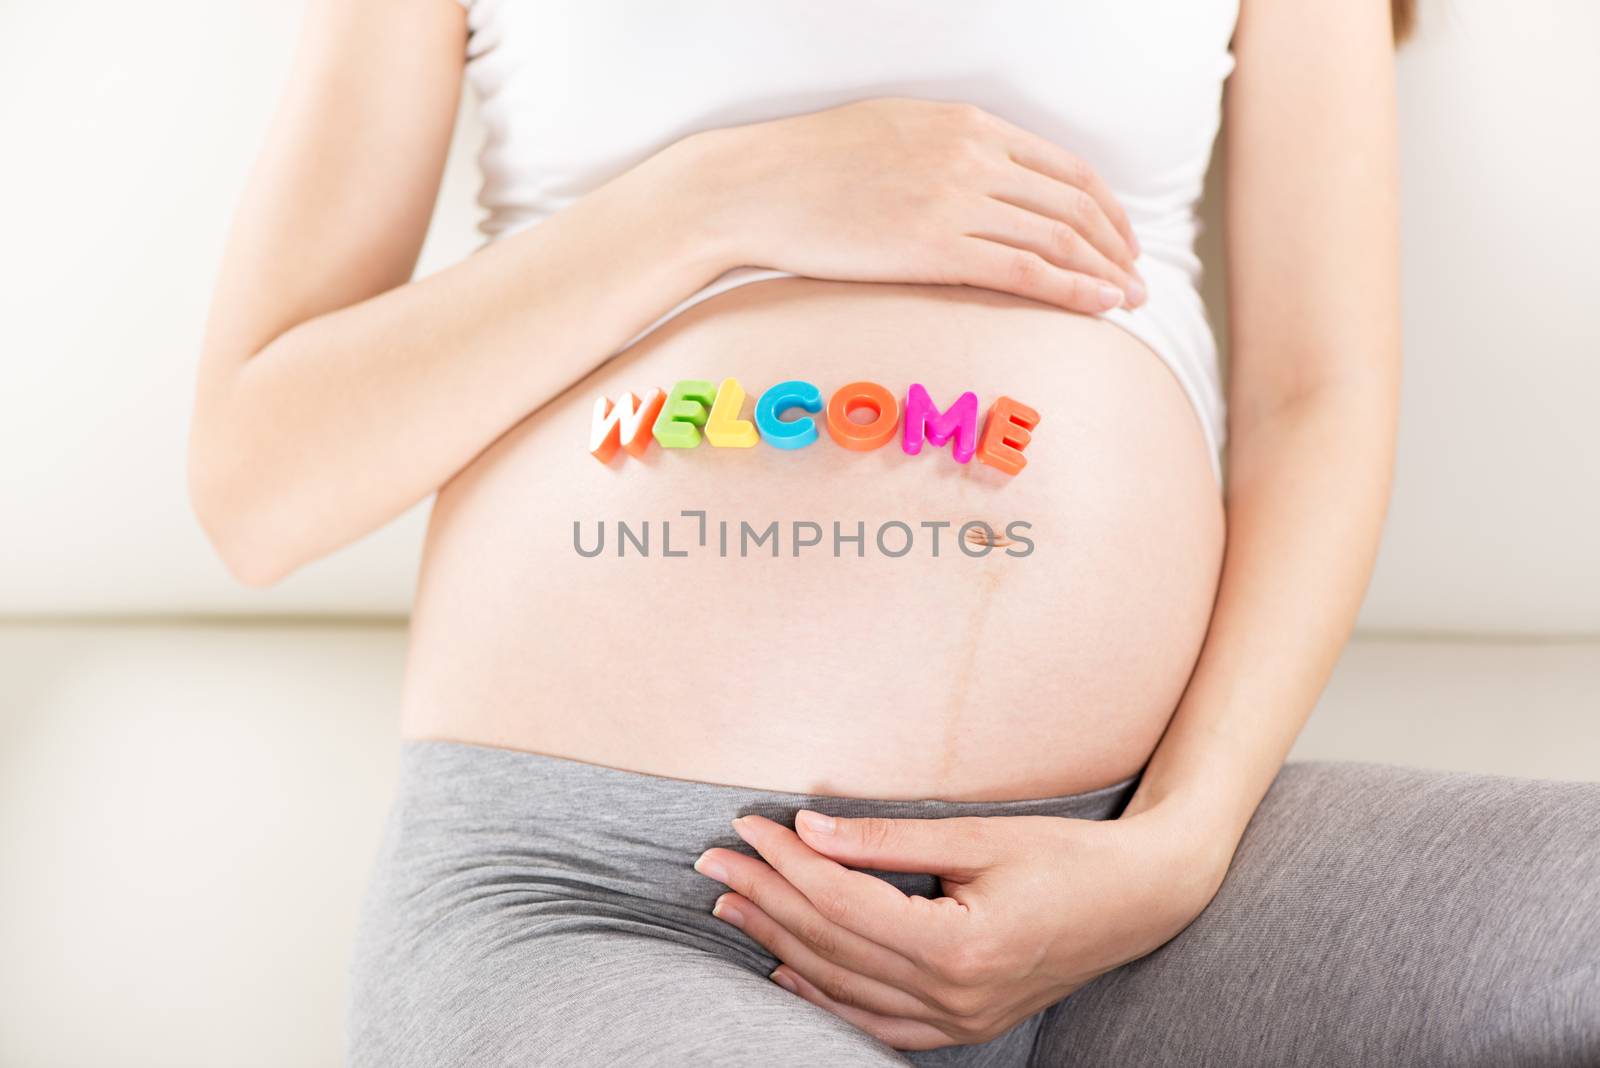 Welcome letters written on a pregnant belly.